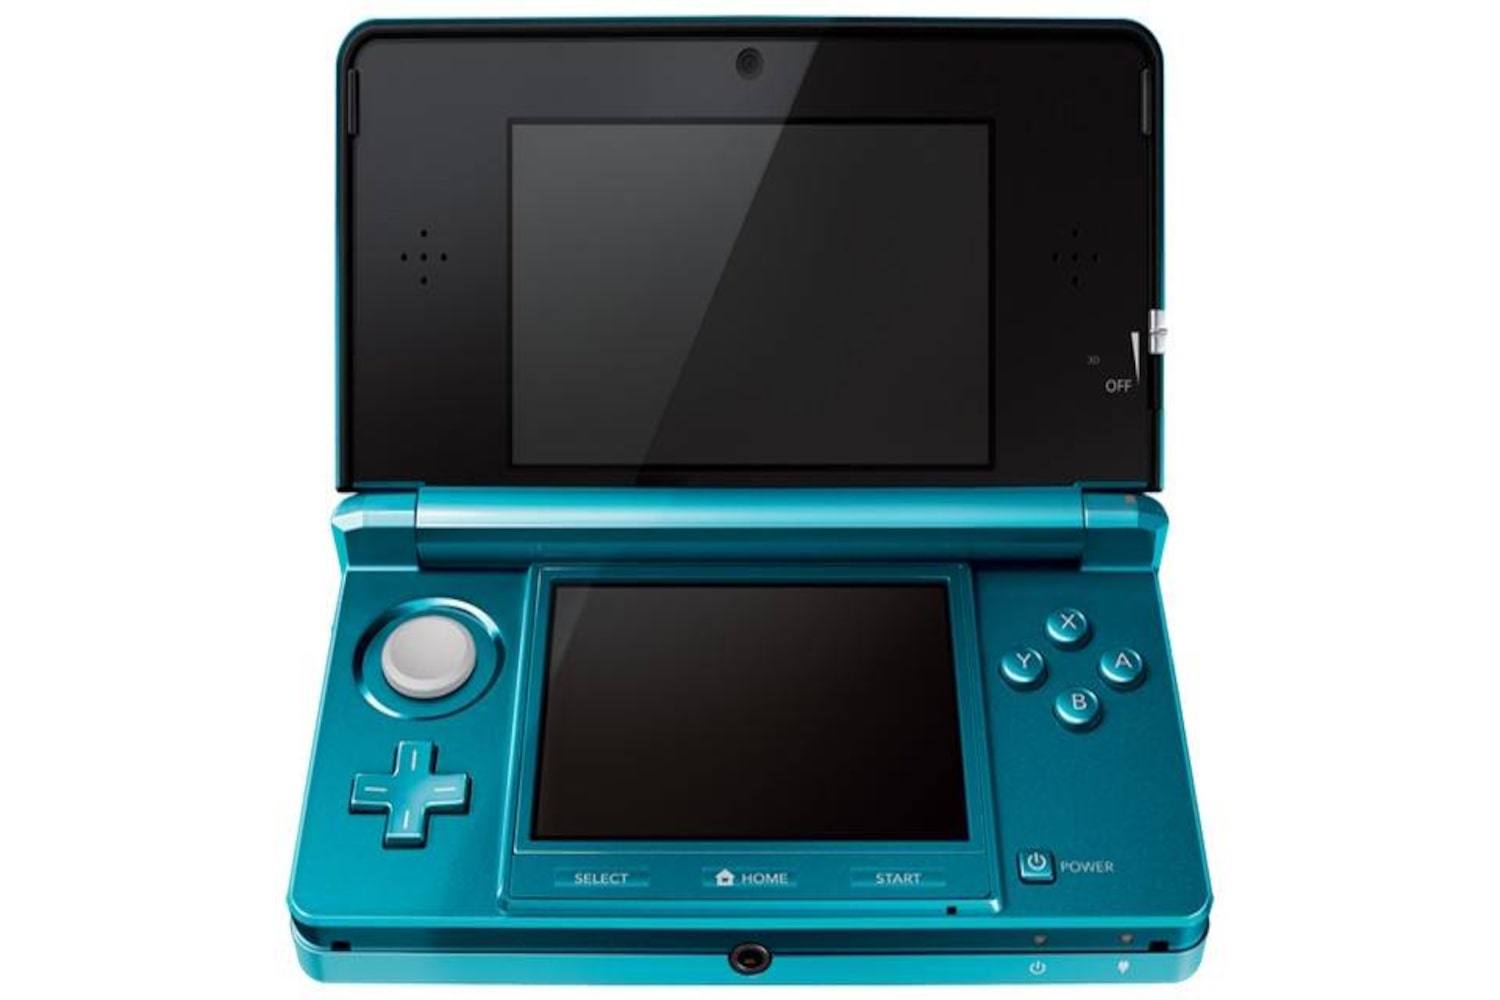 Nintendo 3DS coming to Canada March 27th - The Globe and Mail